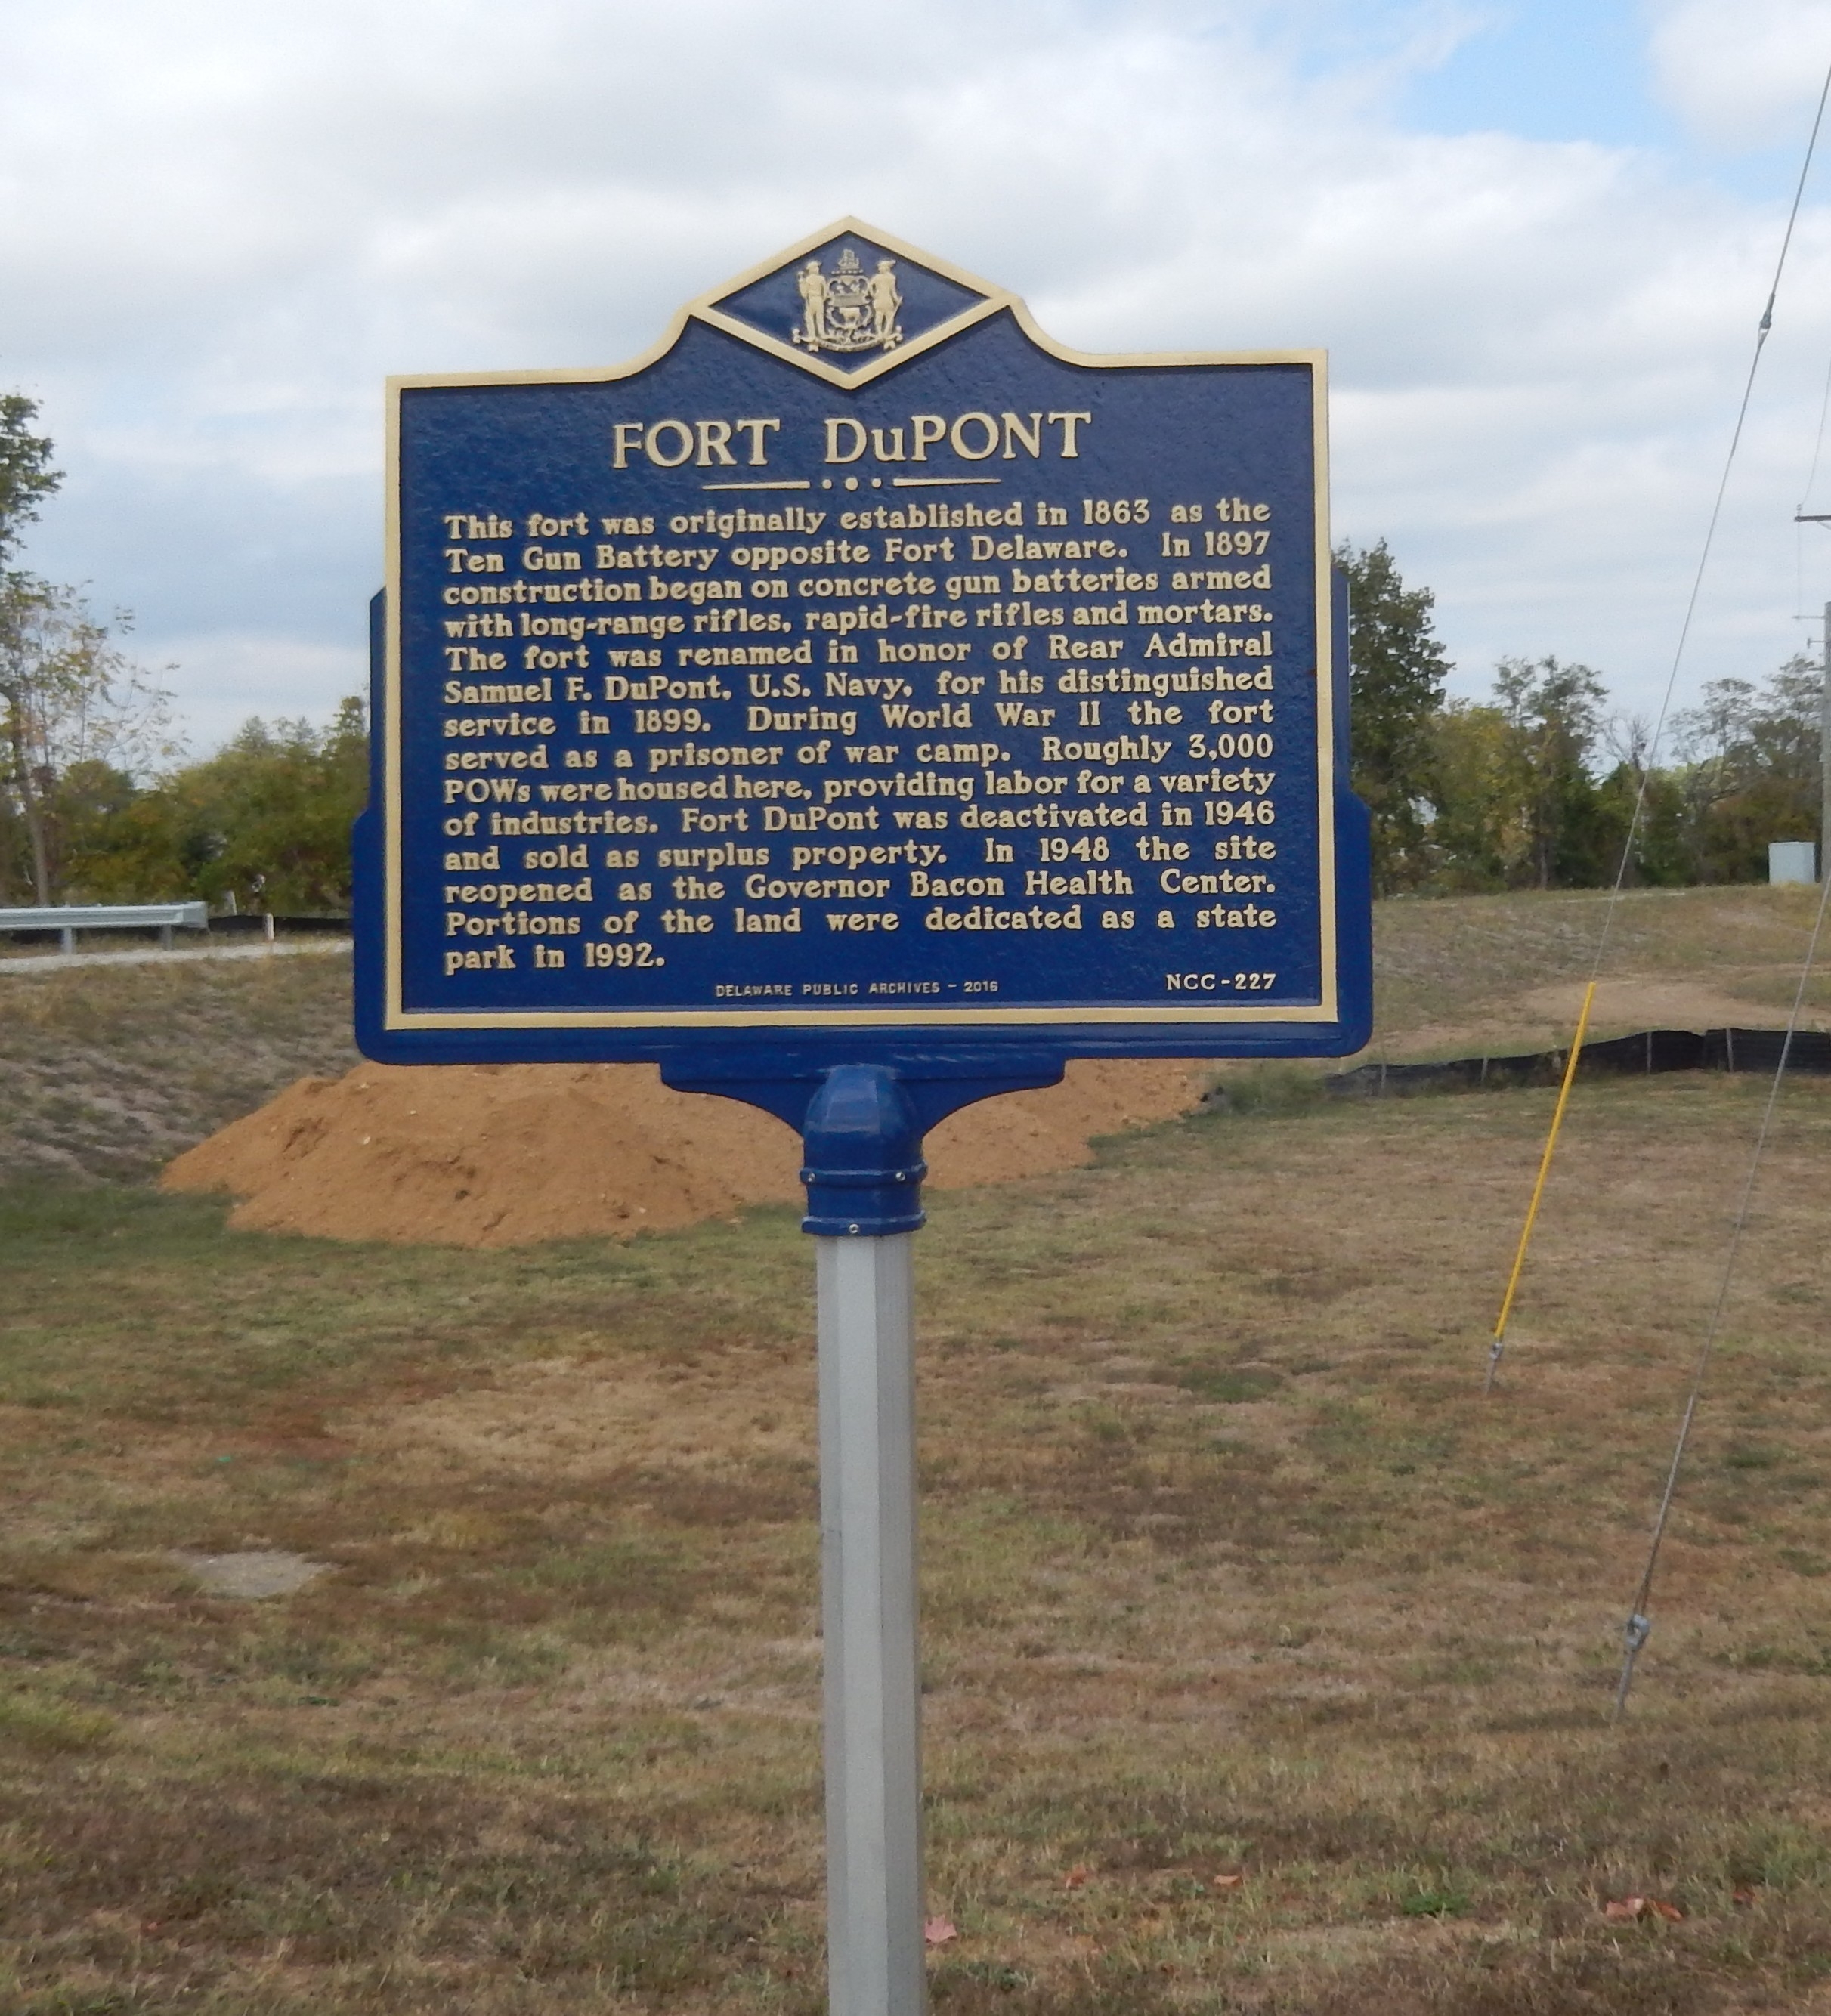 Nearby Fort DuPont Historical Marker